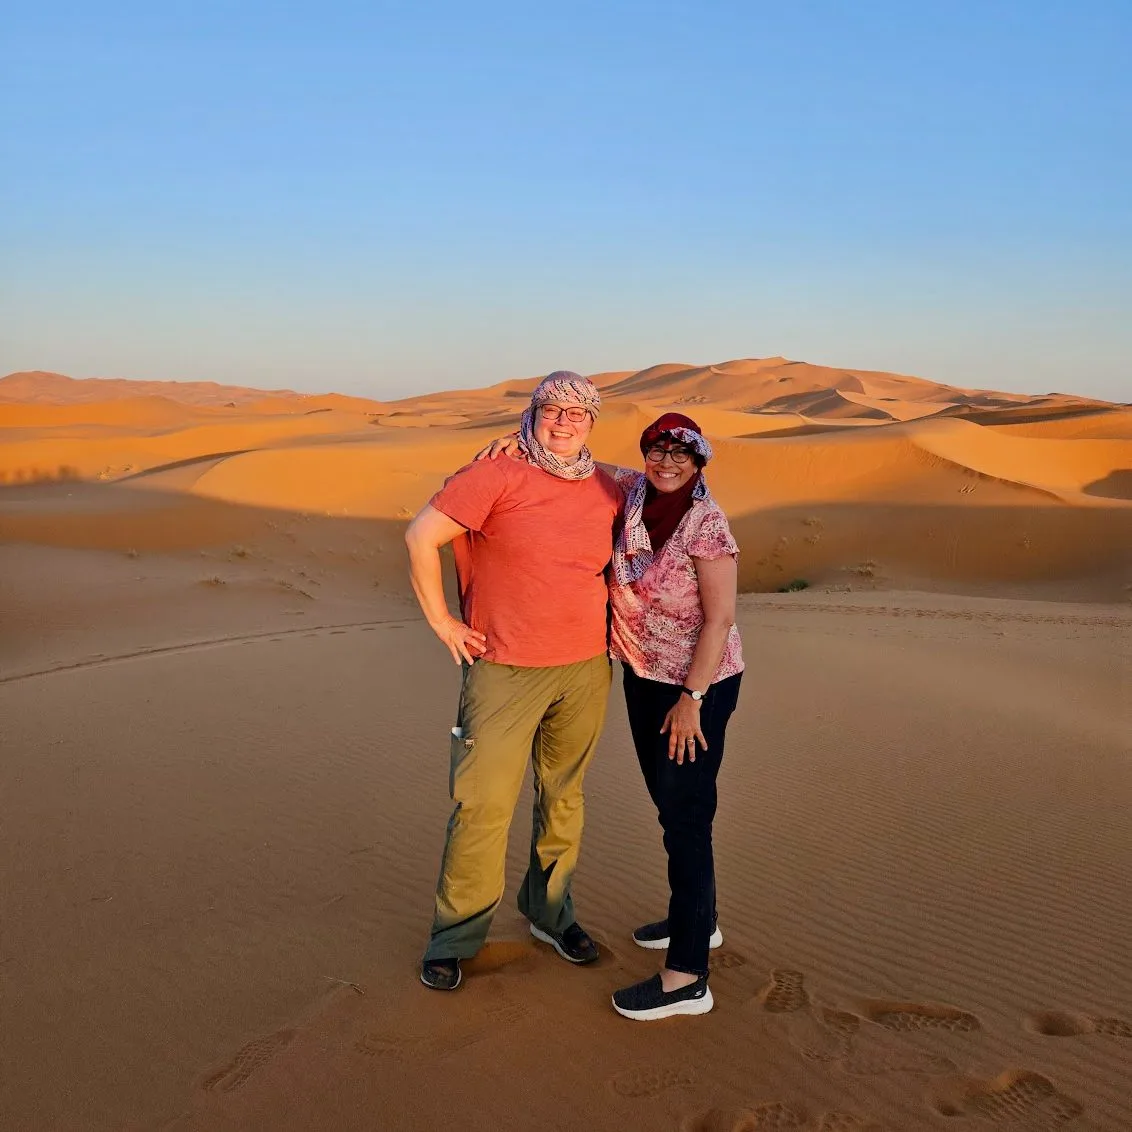 In the sand dunes of Morocco.